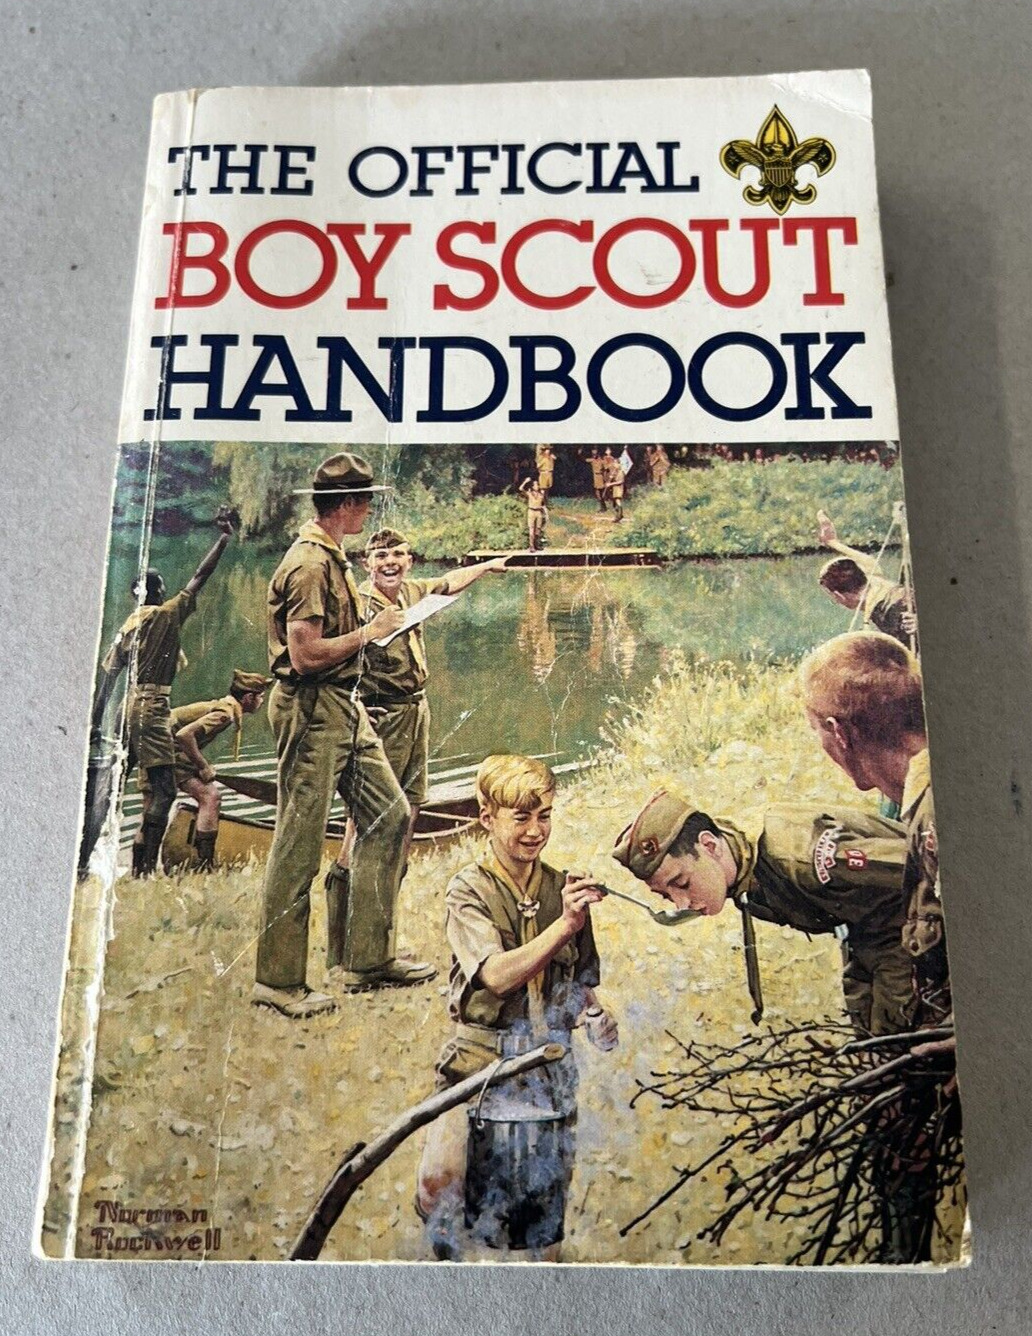 THE OFFICIAL BOY SCOUT HANDBOOK BY WILLIAM BILL HILLCOURT PAPERBOOK